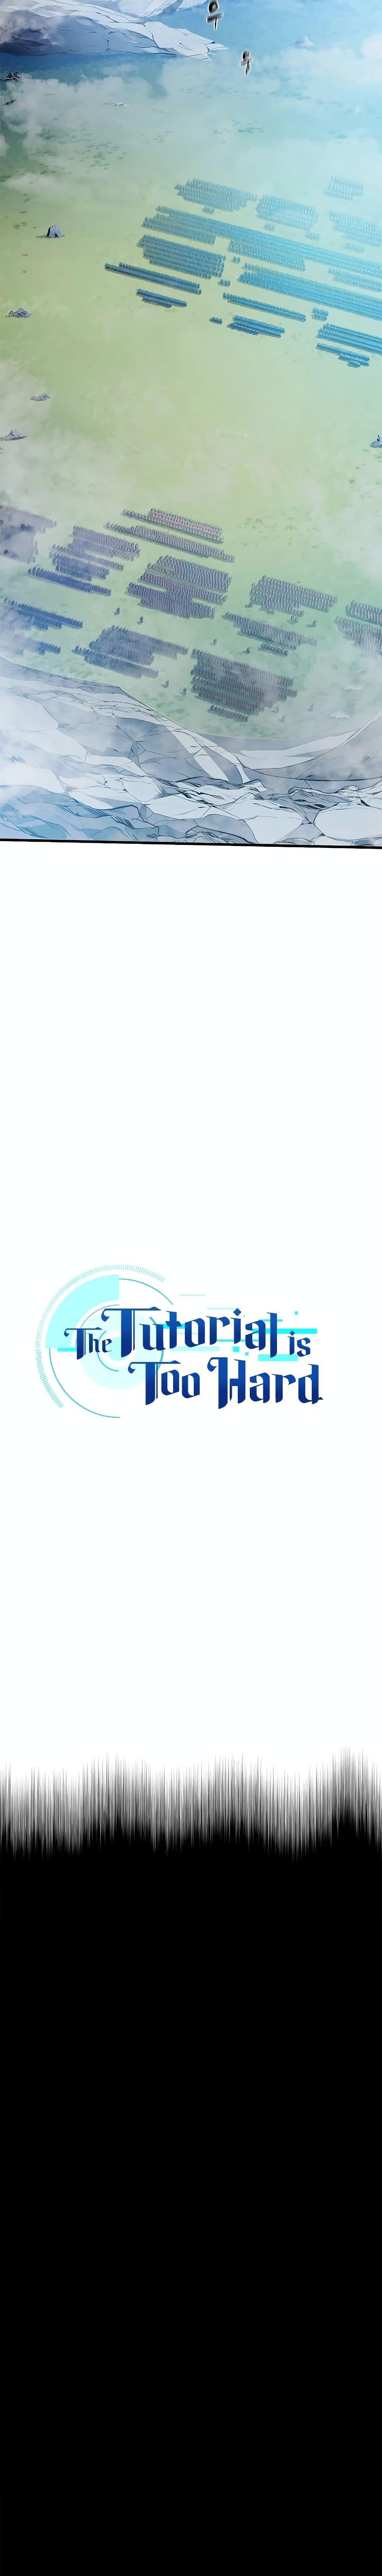 The Tutorial is Too Hard 160 02